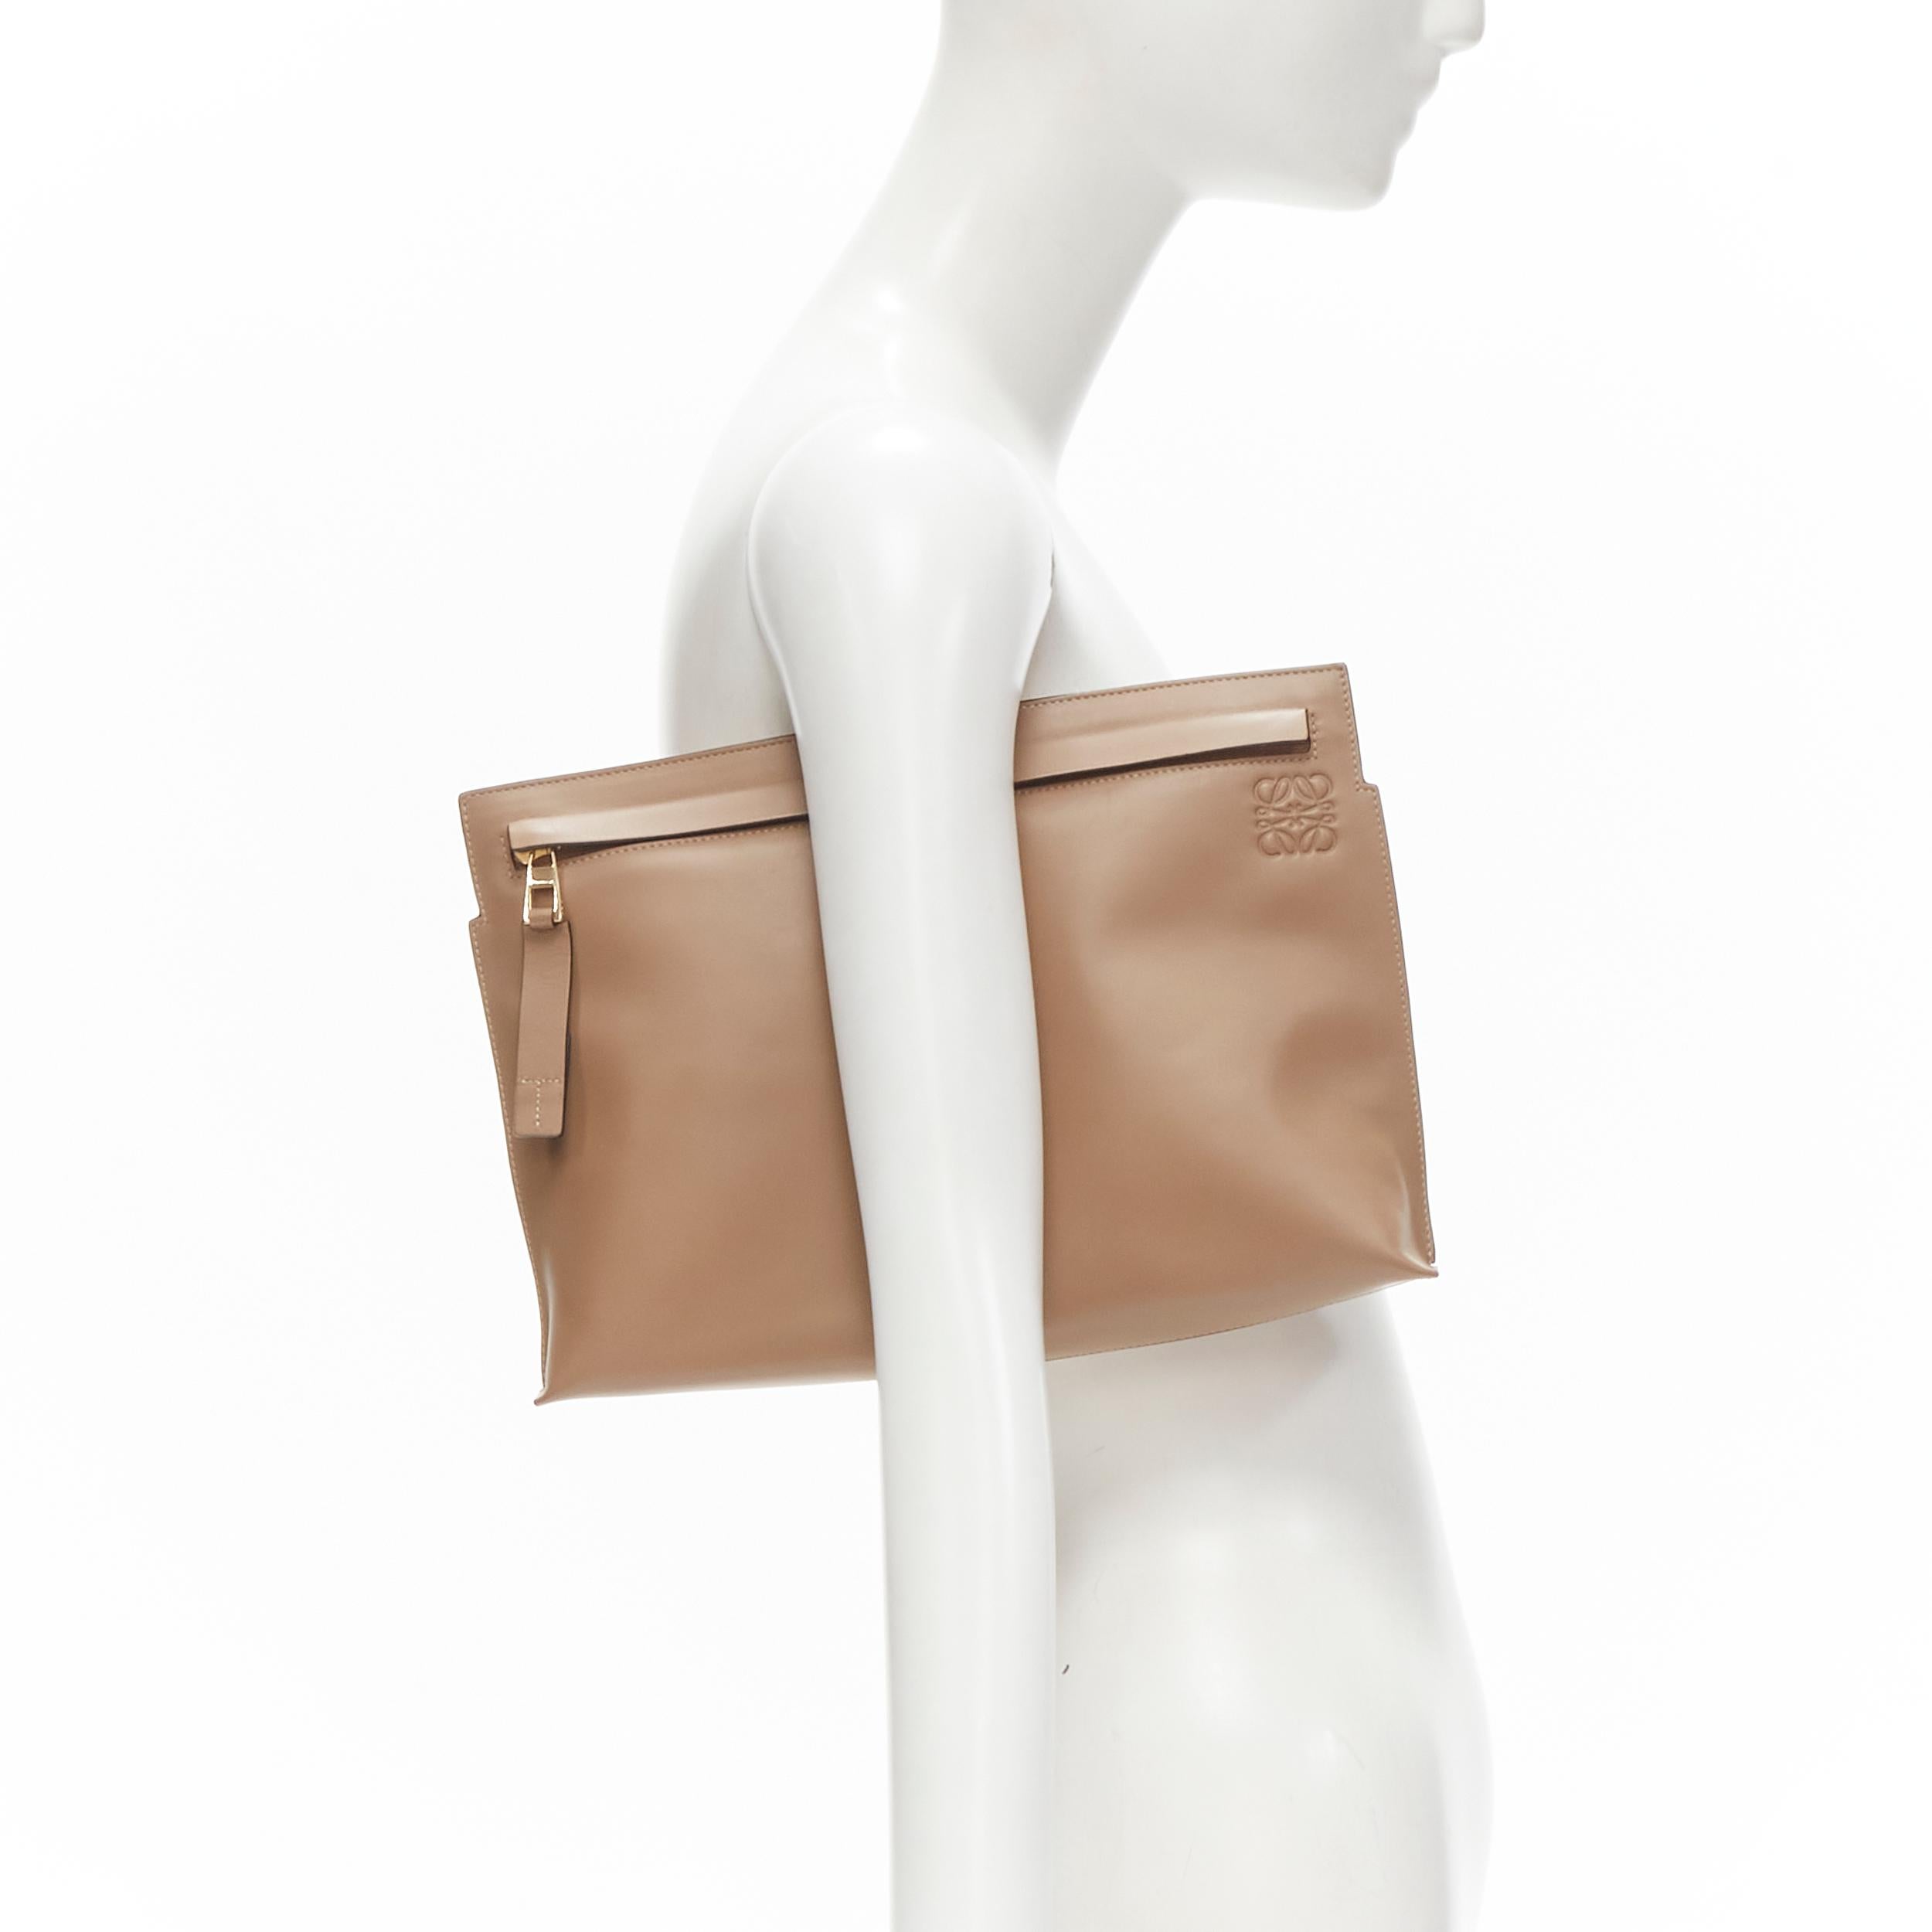 LOEWE T Pouch brown Anagram logo embossed front zip portfolio clutch bag 
Reference: LNKO/A01985 
Brand: Loewe 
Designer: JW Anderson 
Model: T Pouch 
Material: Leather 
Color: Brown 
Pattern: Solid 
Closure: Zip 
Extra Detail: Anagram logo emboss